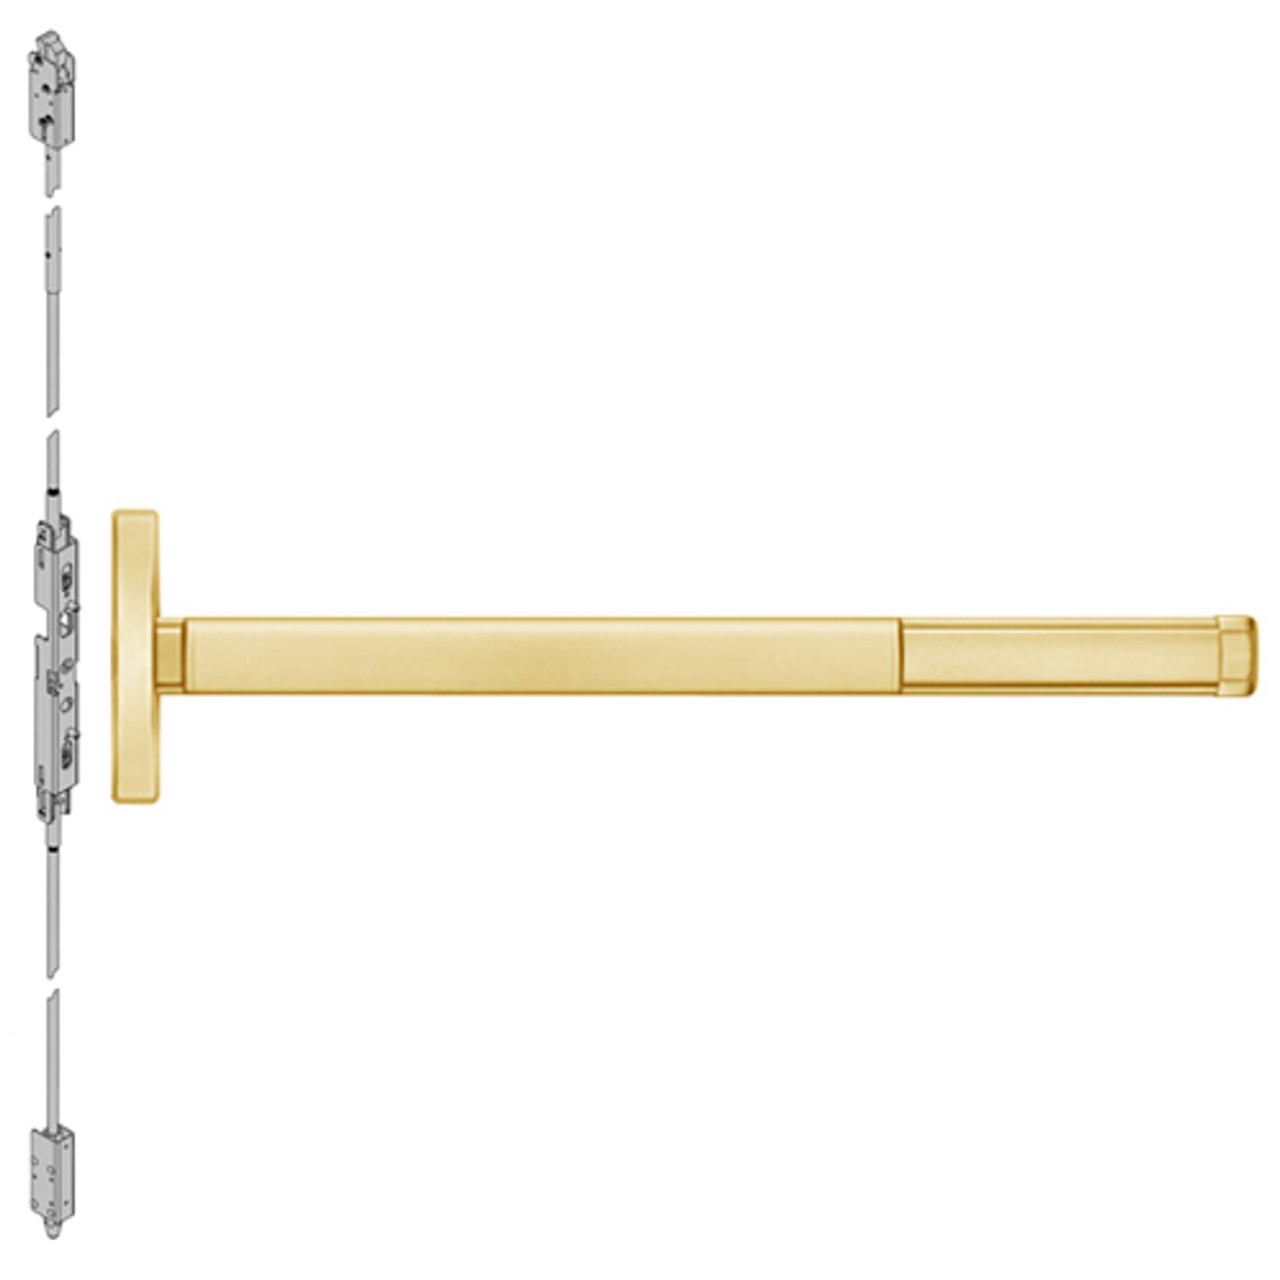 TS2603LBR-605-36 PHI 2600 Series Concealed Vertical Rod Exit Device with Touchbar Monitoring Switch Prepped for Key Retracts Latchbolt in Bright Brass Finish